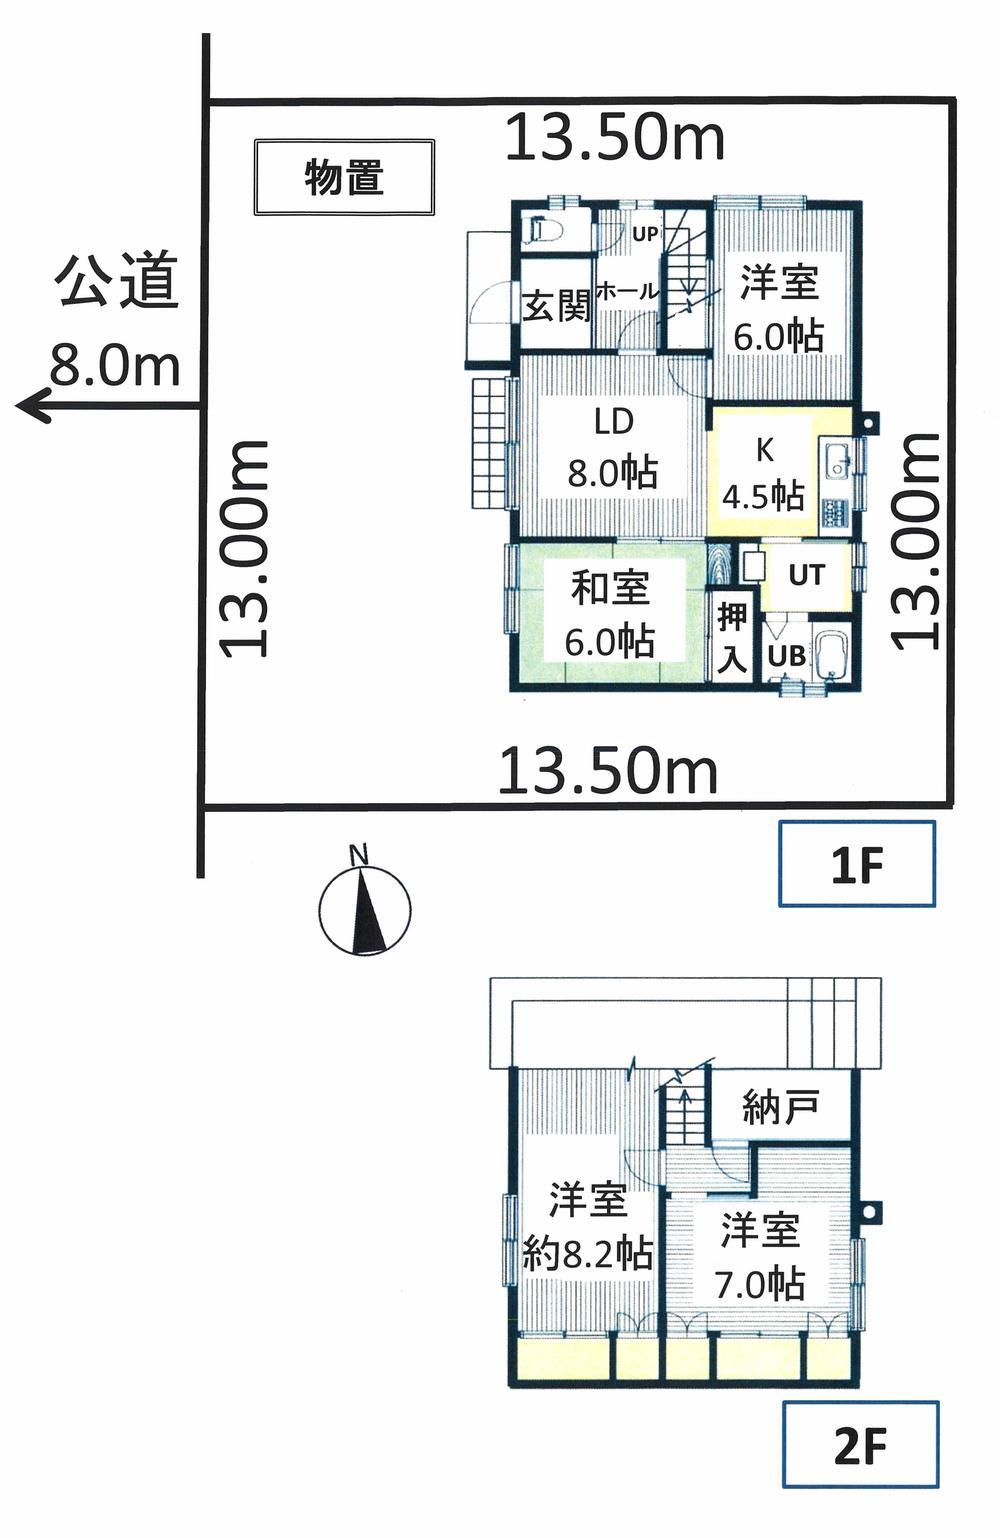 Floor plan. Seller Property! By all means, please preview! 